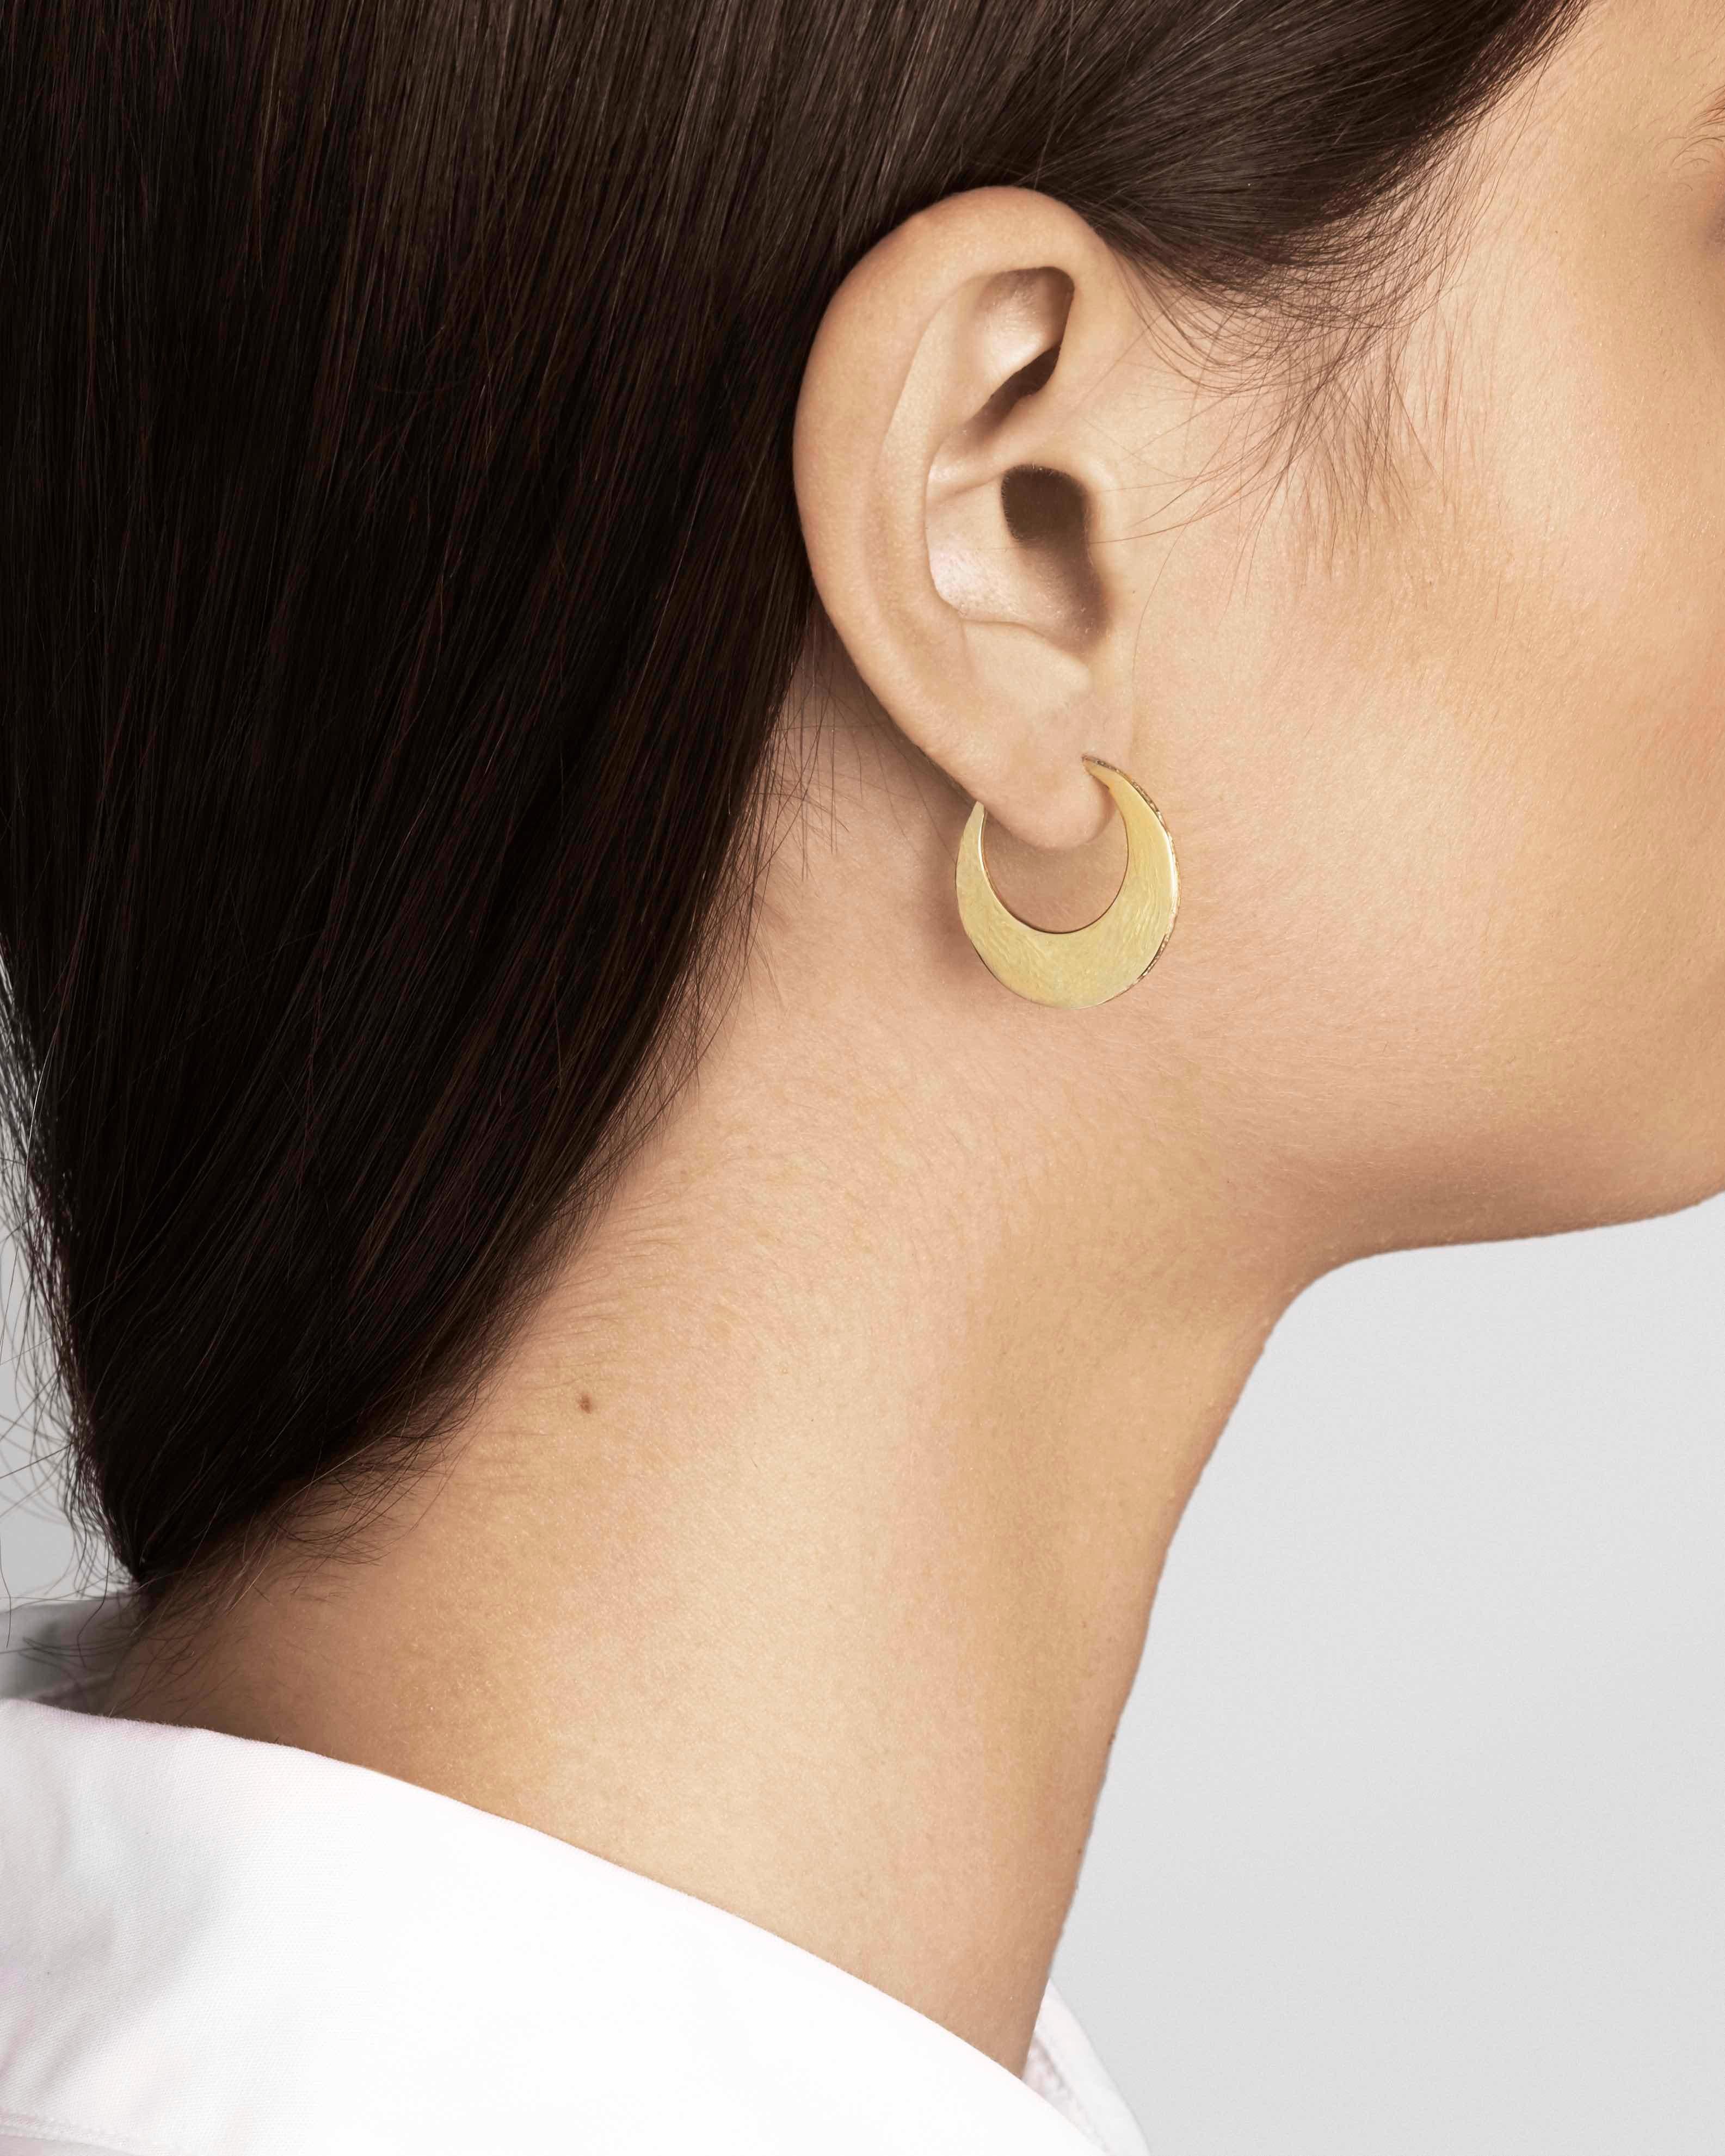 Textured Crescent Hoop Earrings in Gold by Allison Bryan 2